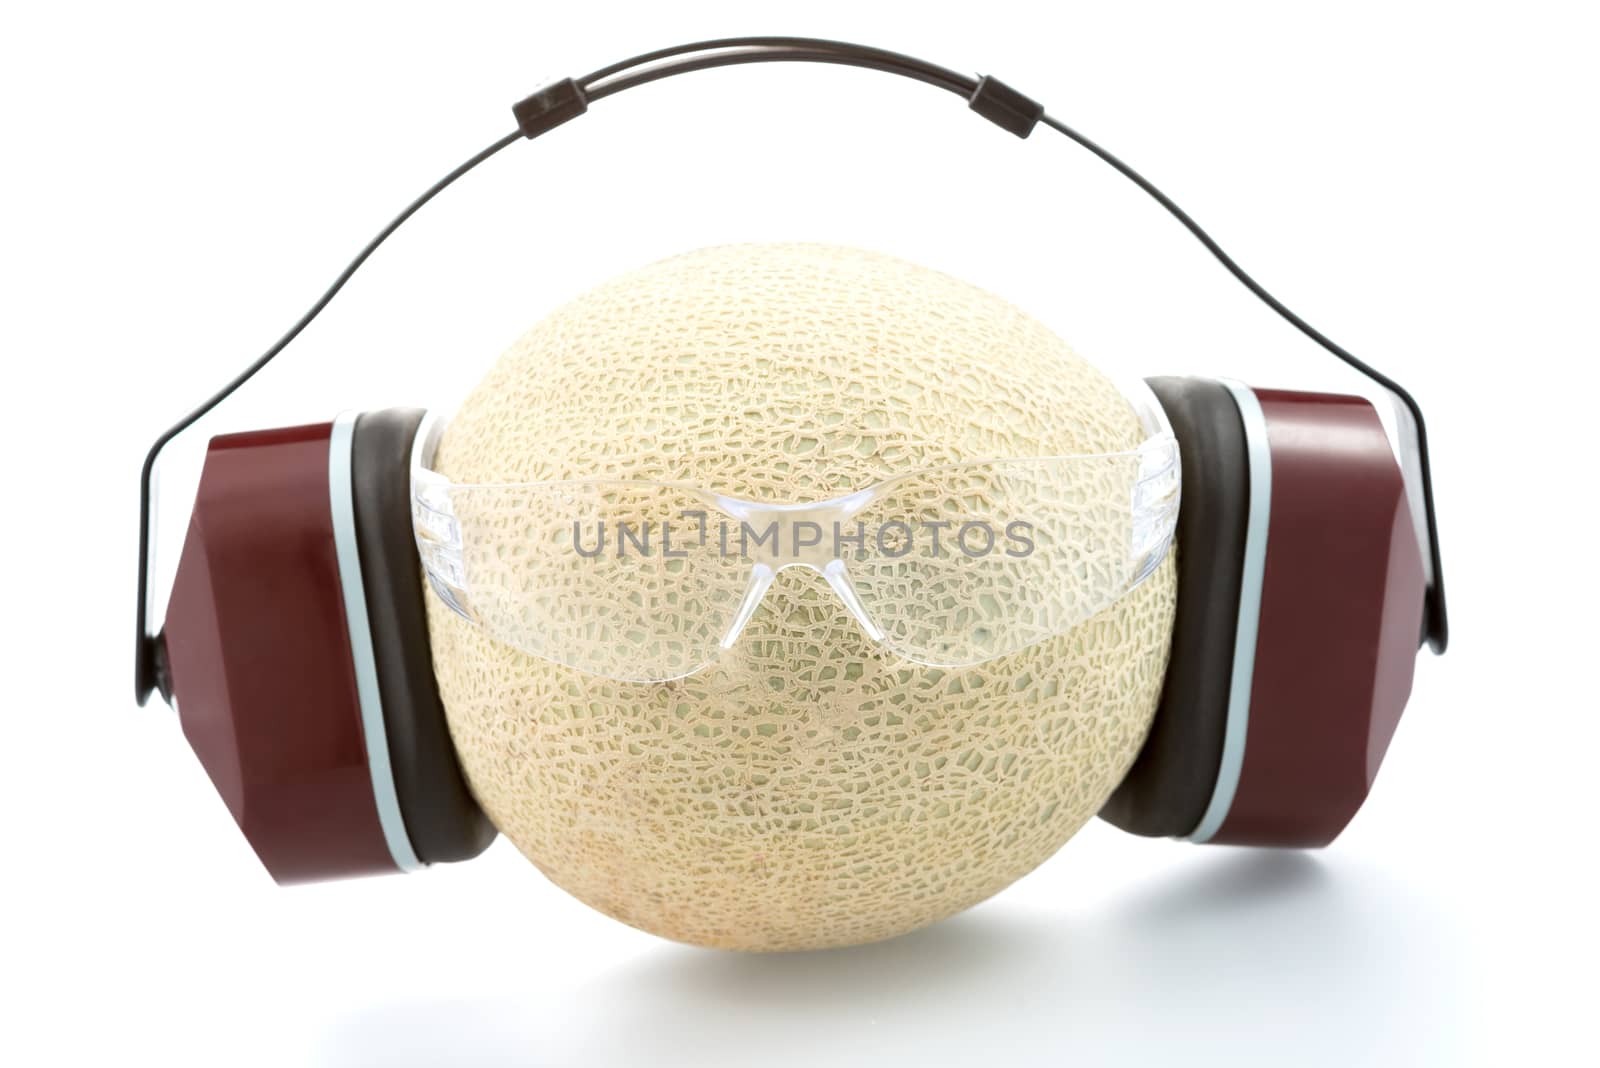 Industrial protective headphones and safety glasseson on the melon, isolated on white background